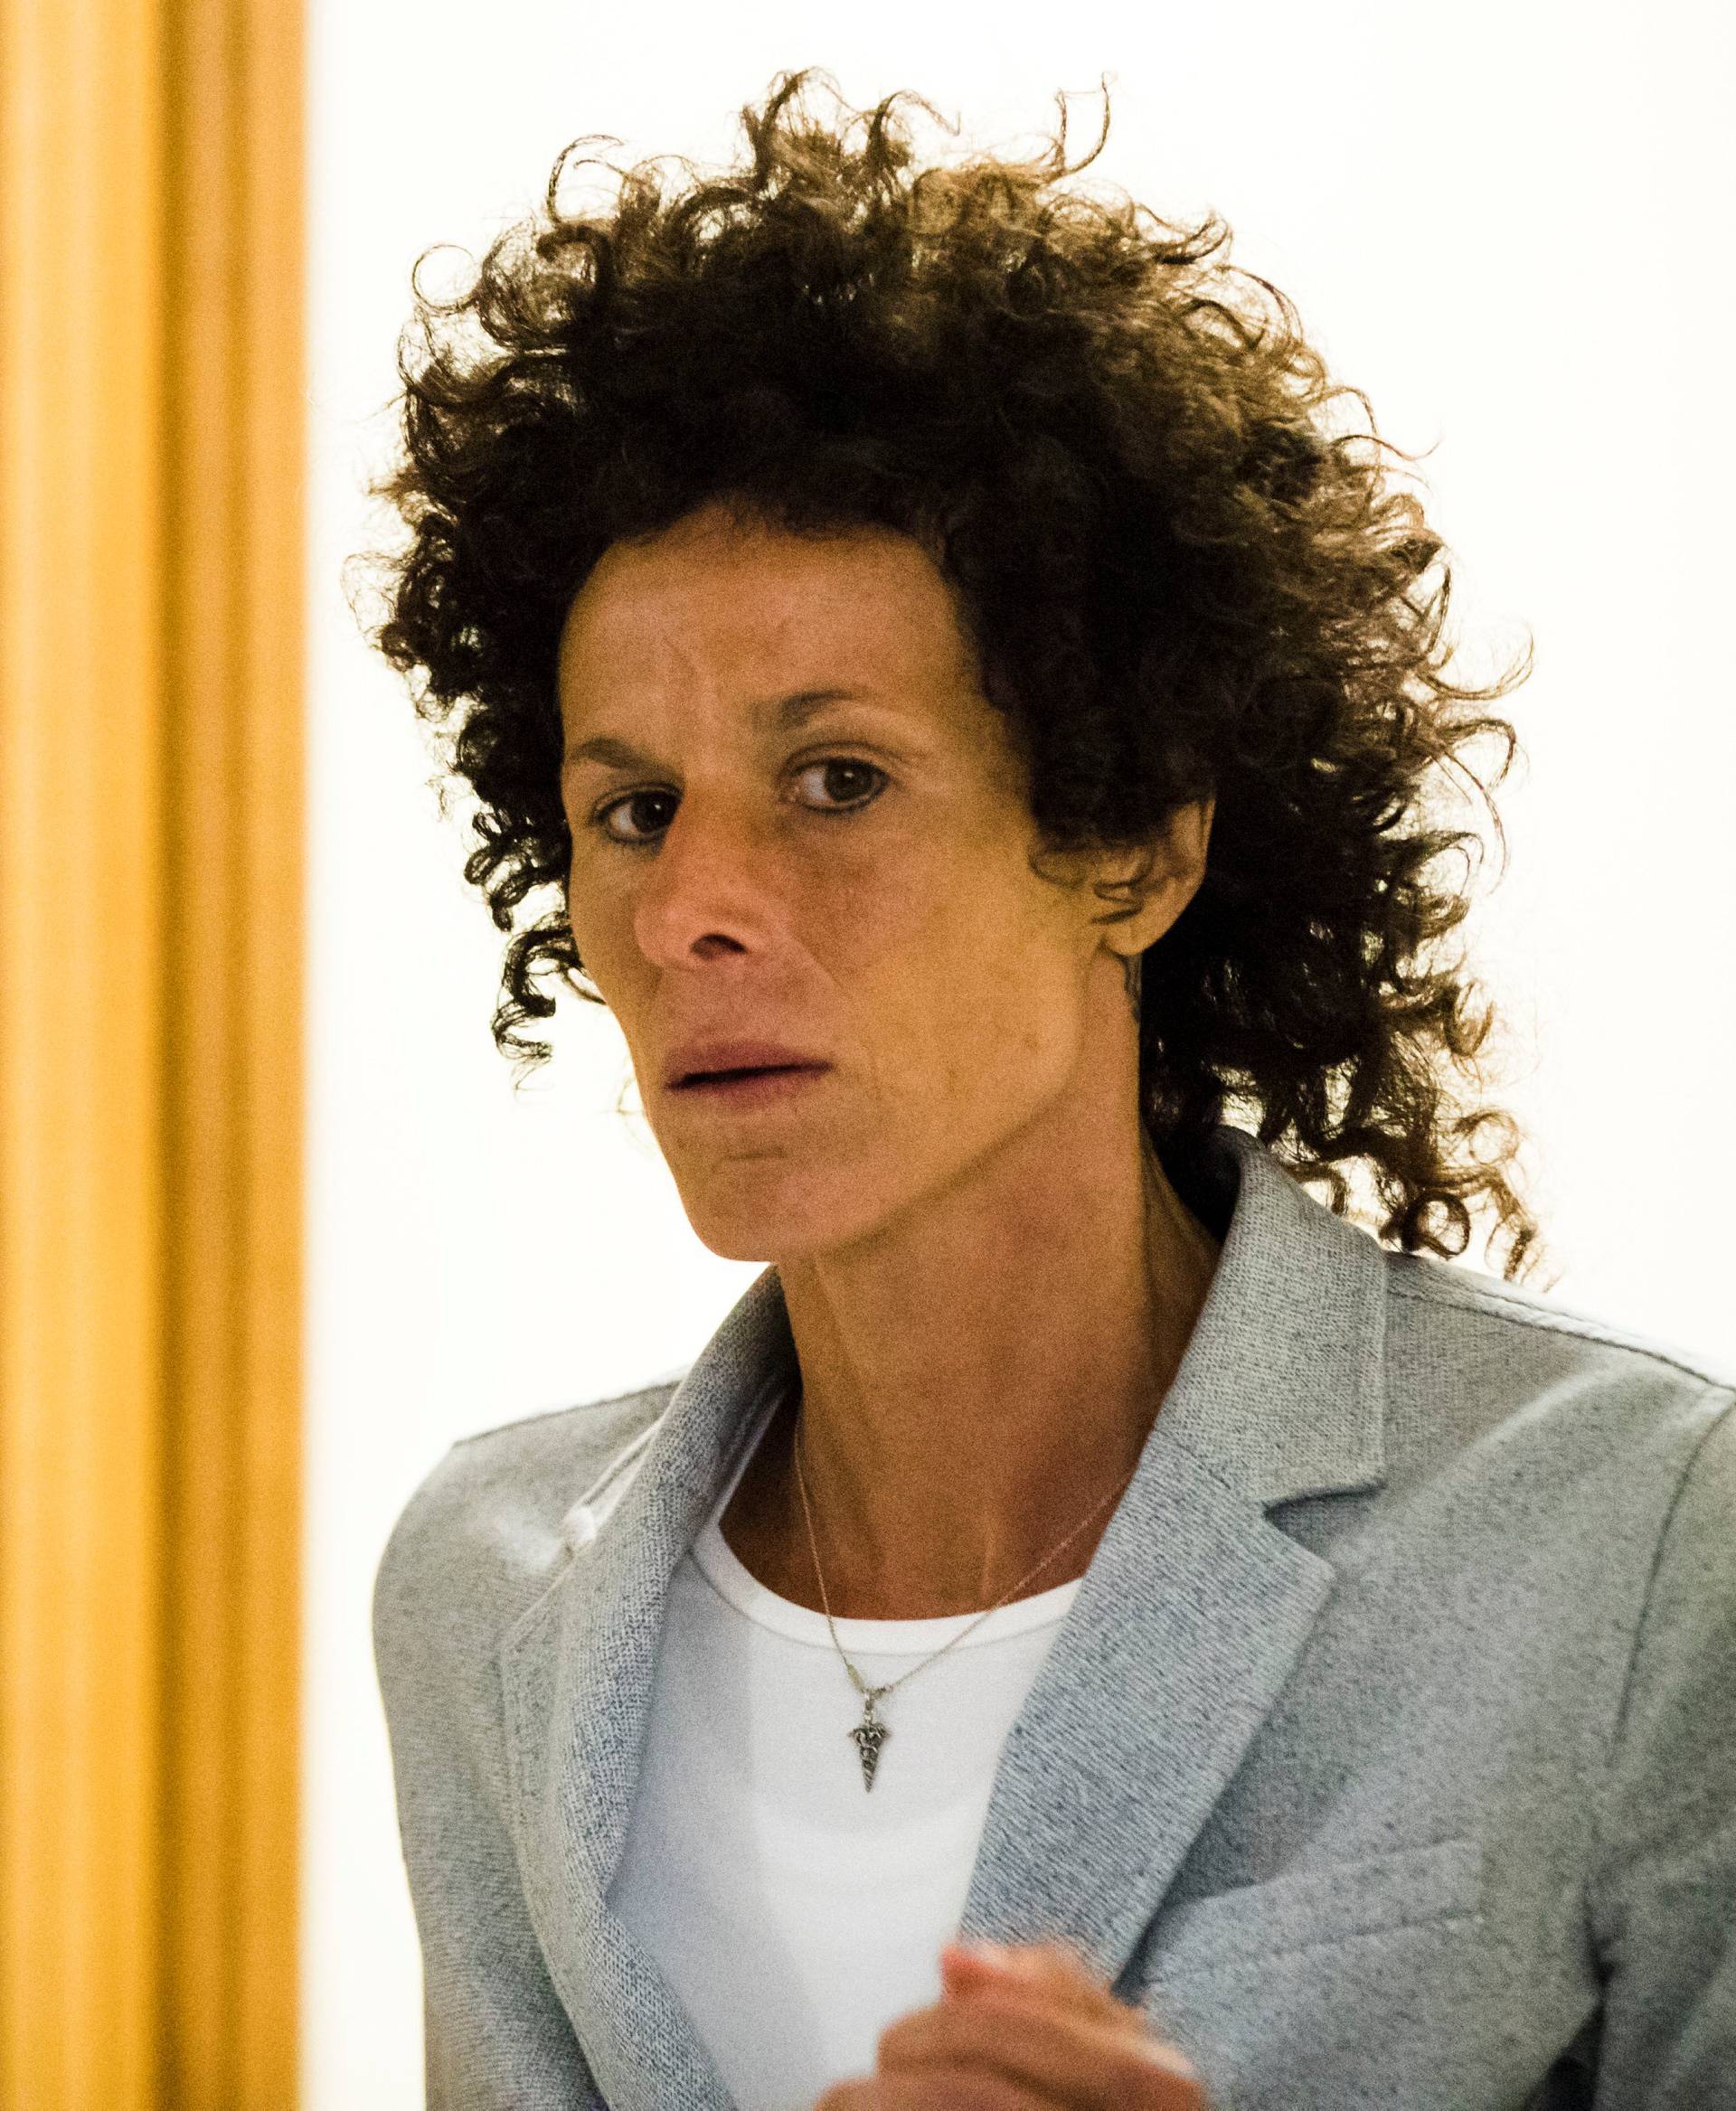 Andrea Constand walks from the courtroom after testifying at Bill Cosby's sexual assault trial at the Montgomery County Courthouse in Norristown